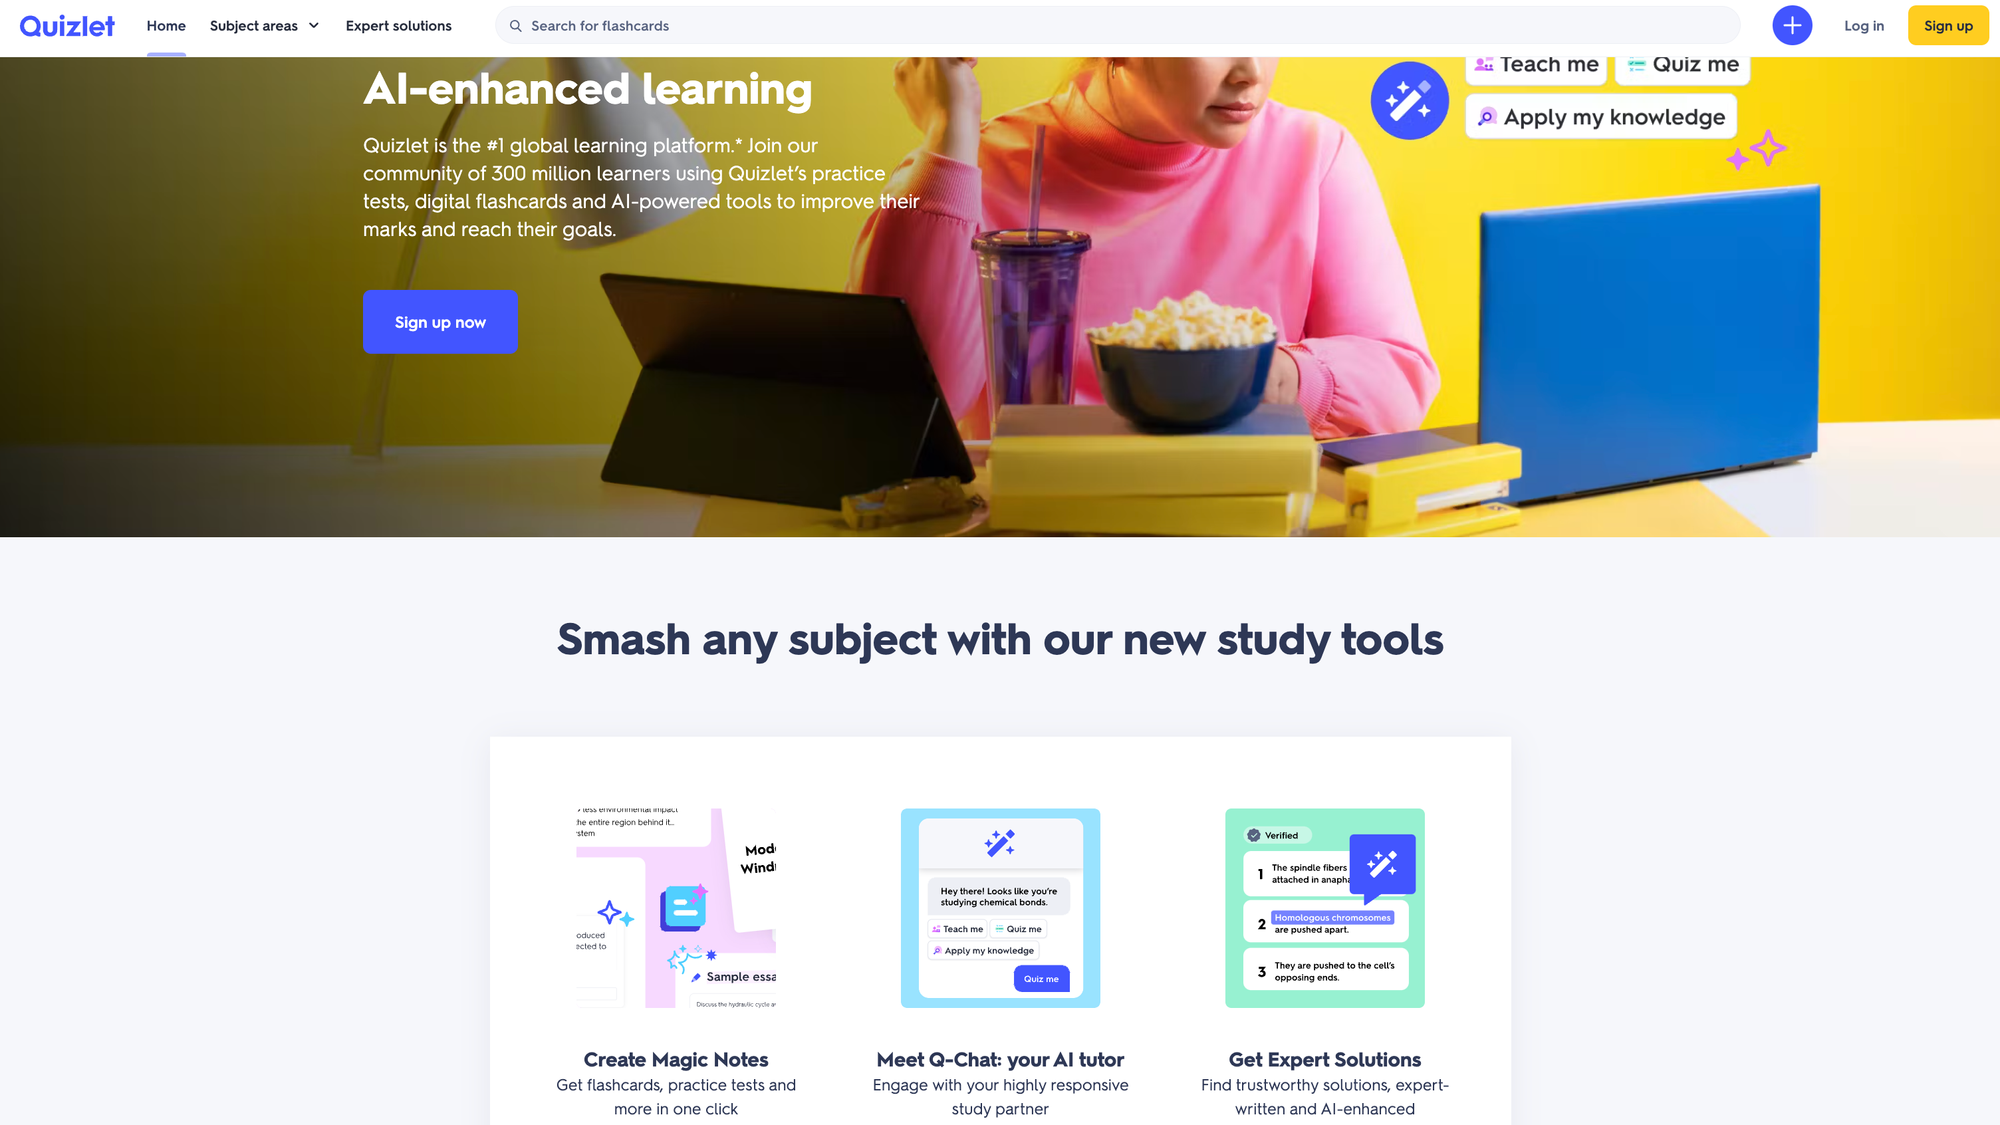 Quizlet homepage